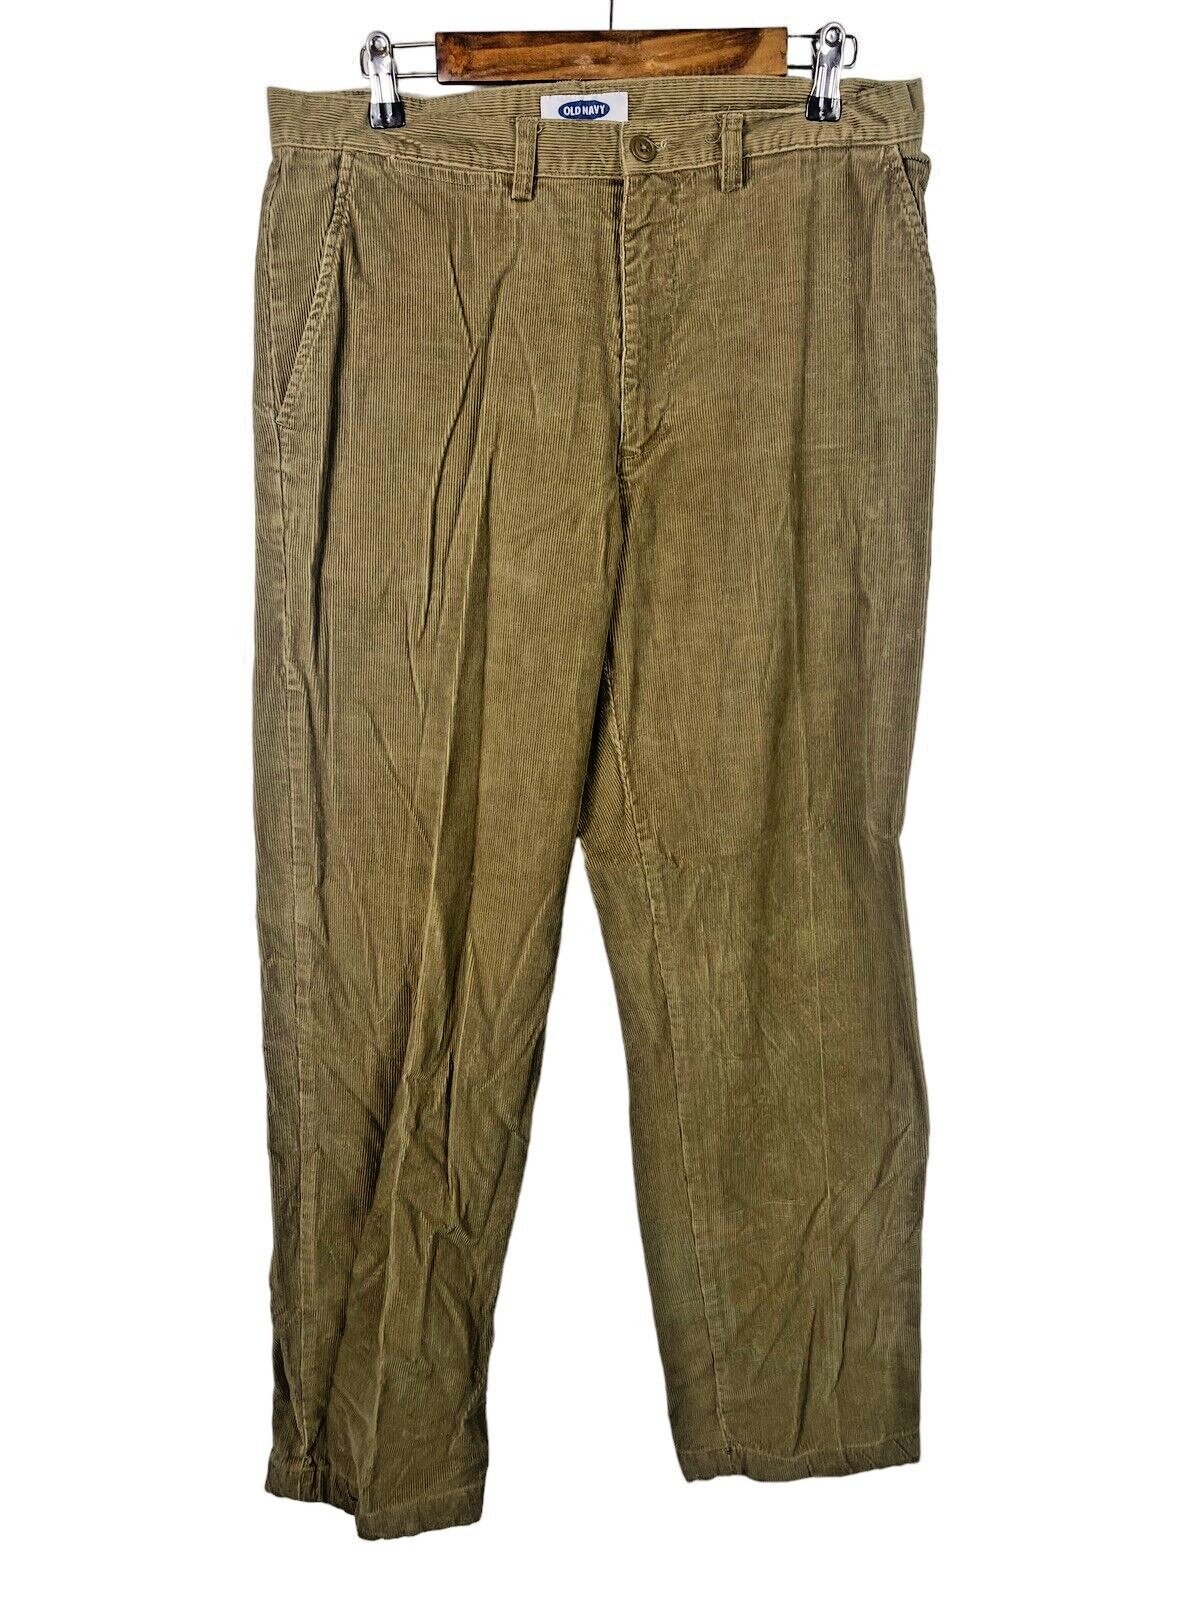 Primary image for Old Navy Corduroy Pants Size 33 x 32 33x32 Mens 100% Cotton Tan Lite Brown Cords